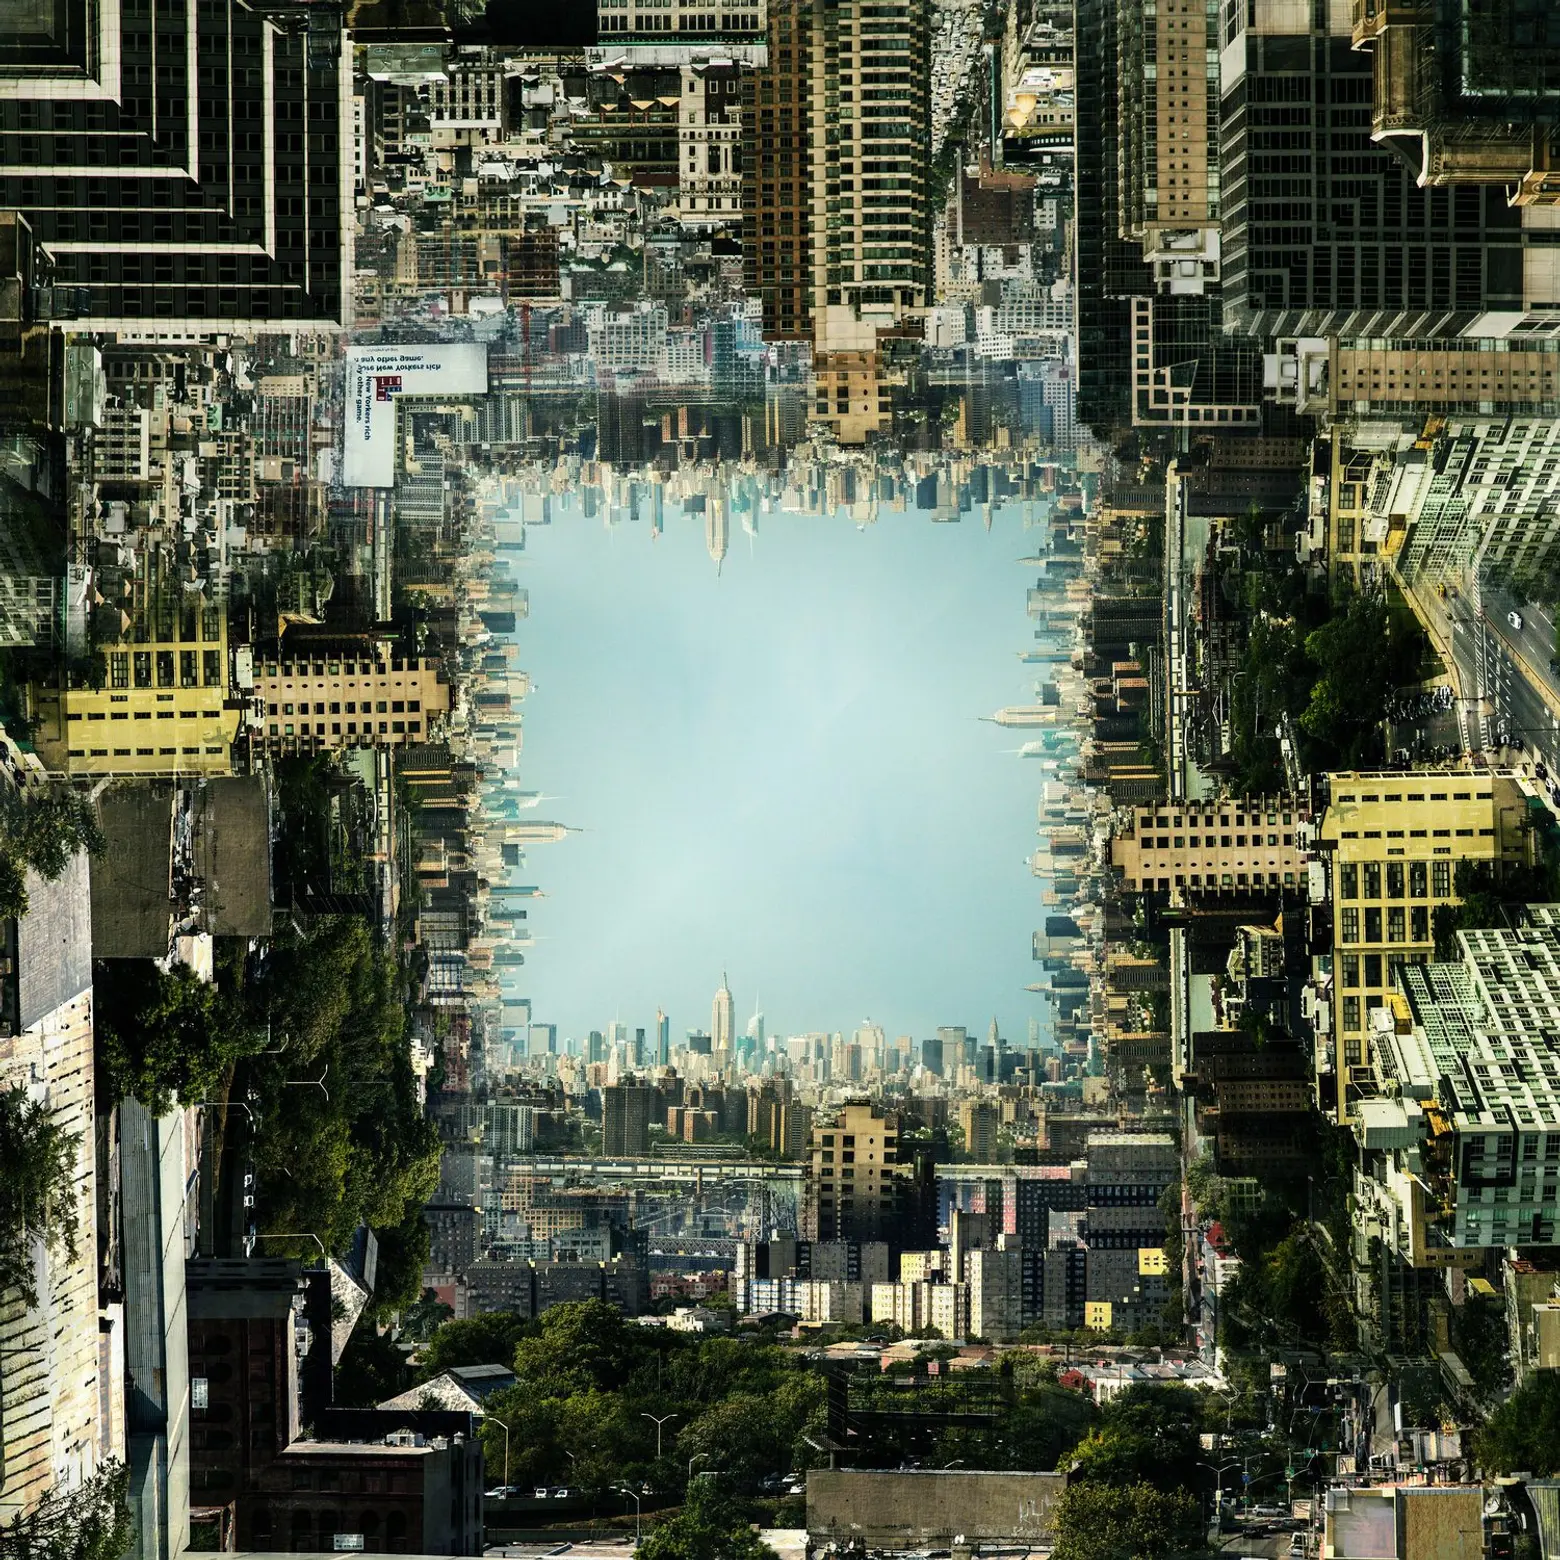 Juan Jose Egusquiza, Impossible Landscapes, NYC photography